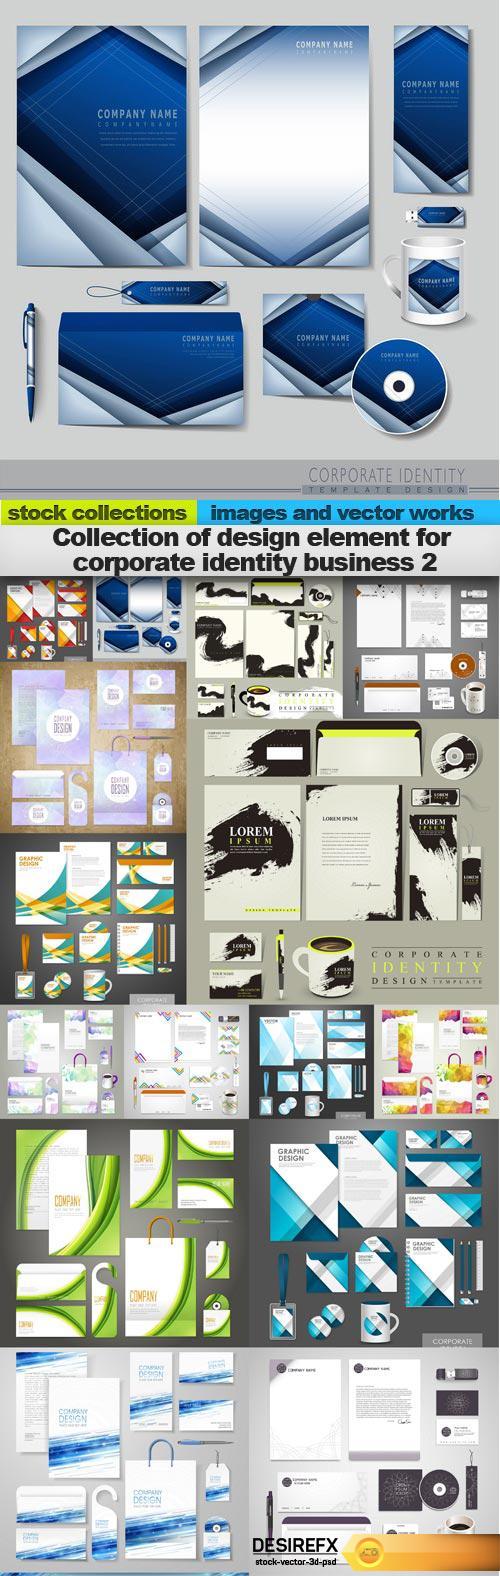 Collection of design element for corporate identity business 2, 15 x EPS